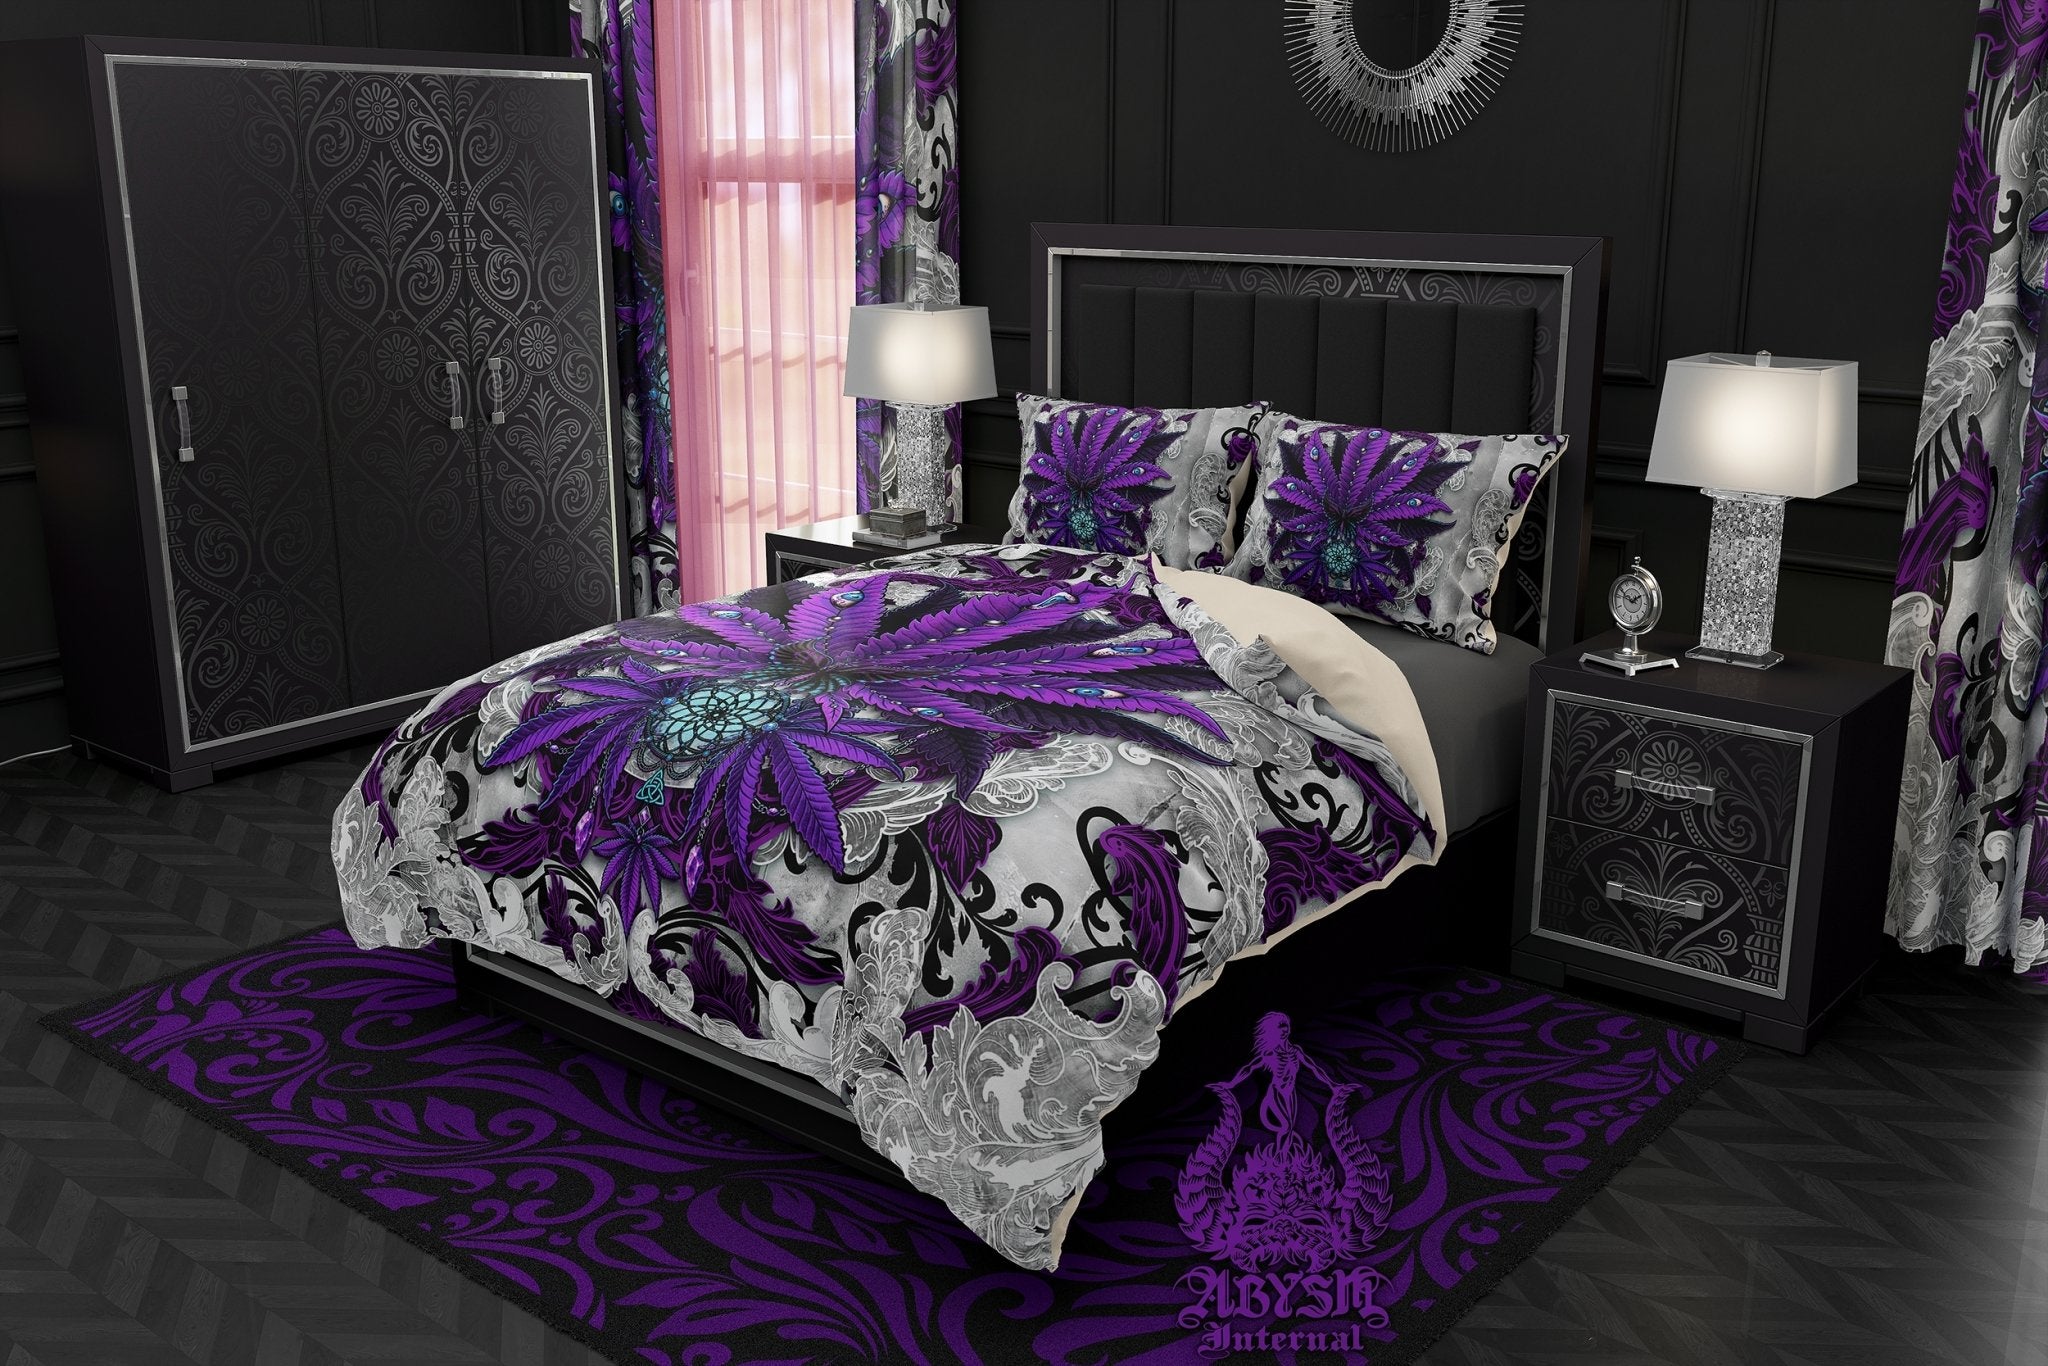 Weed Bedding Set, Comforter and Duvet, Cannabis Bed Cover, Marijuana Bedroom Decor, King, Queen and Twin Size, 420 Room Art - Purple White Goth - Abysm Internal